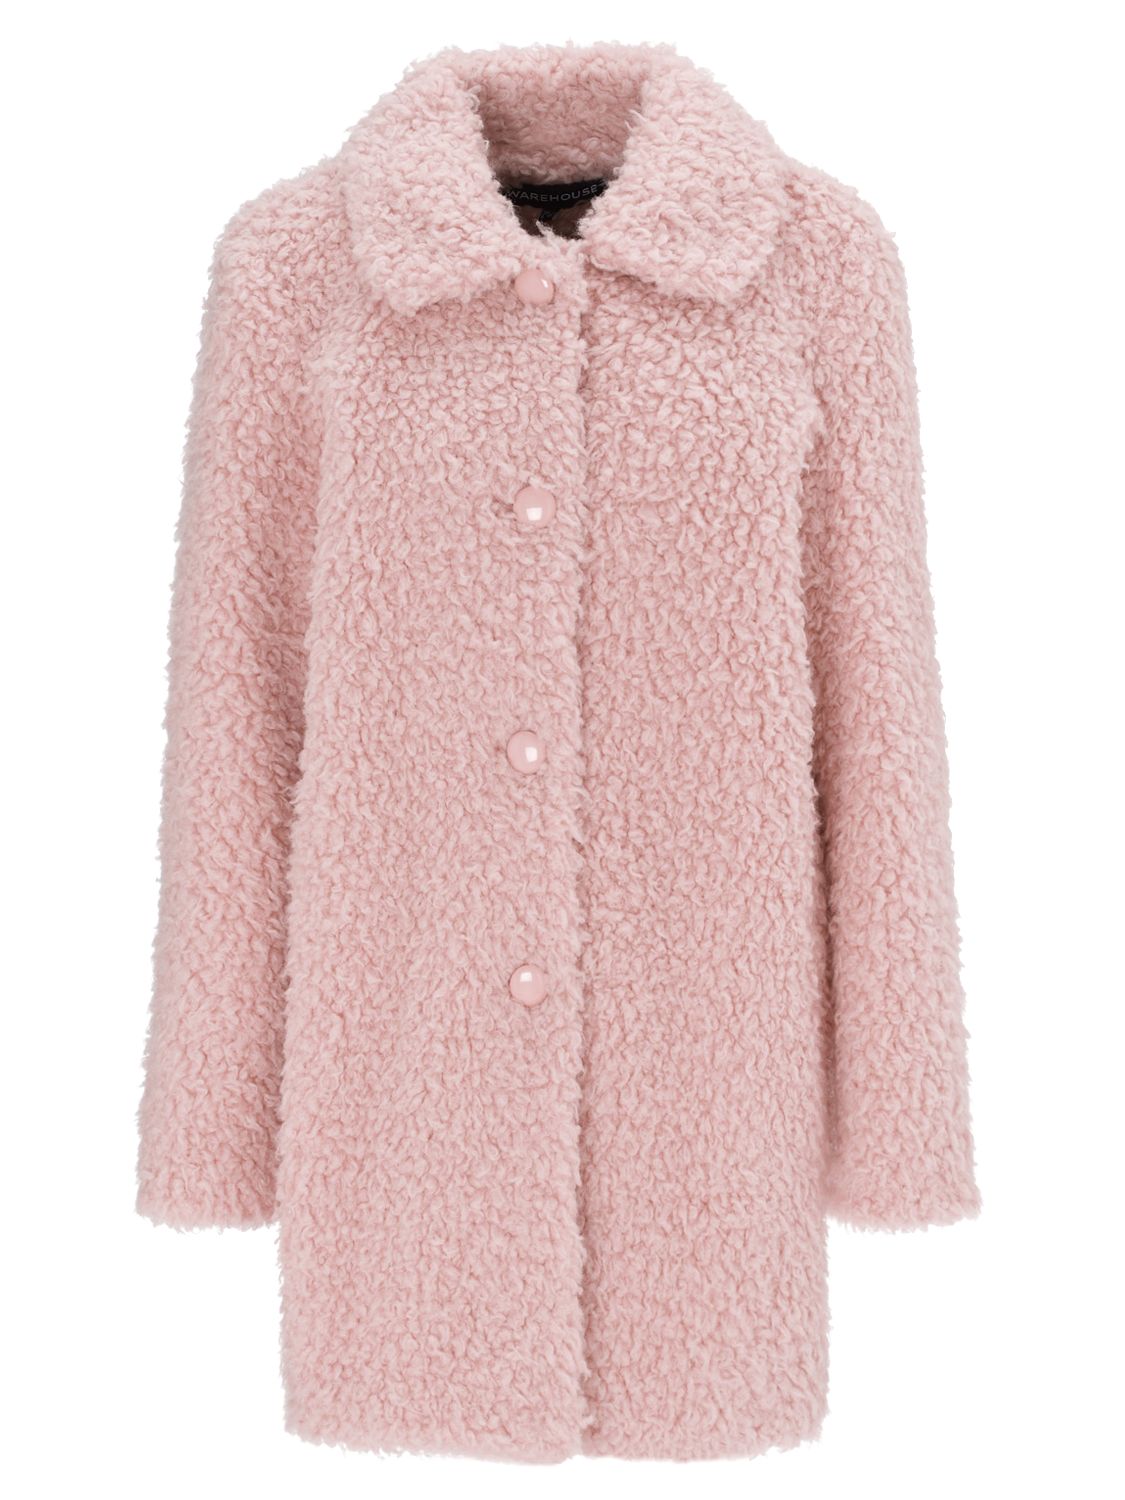 Warehouse Fluffy Teddy Coat, Pink at John Lewis & Partners